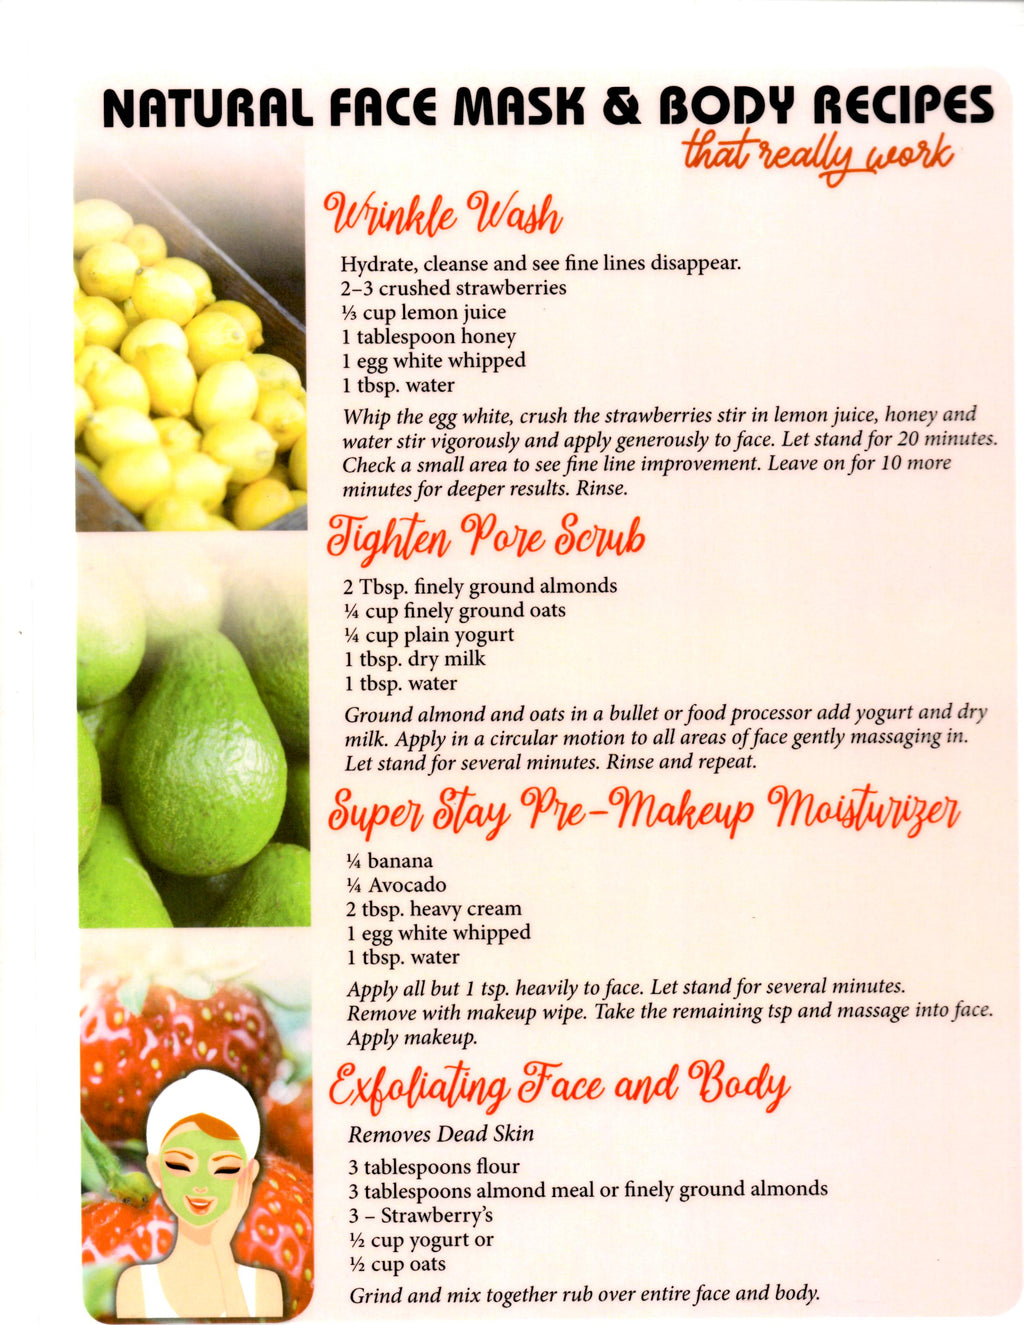 Natural Face Mask and Body Recipes Lament Chart